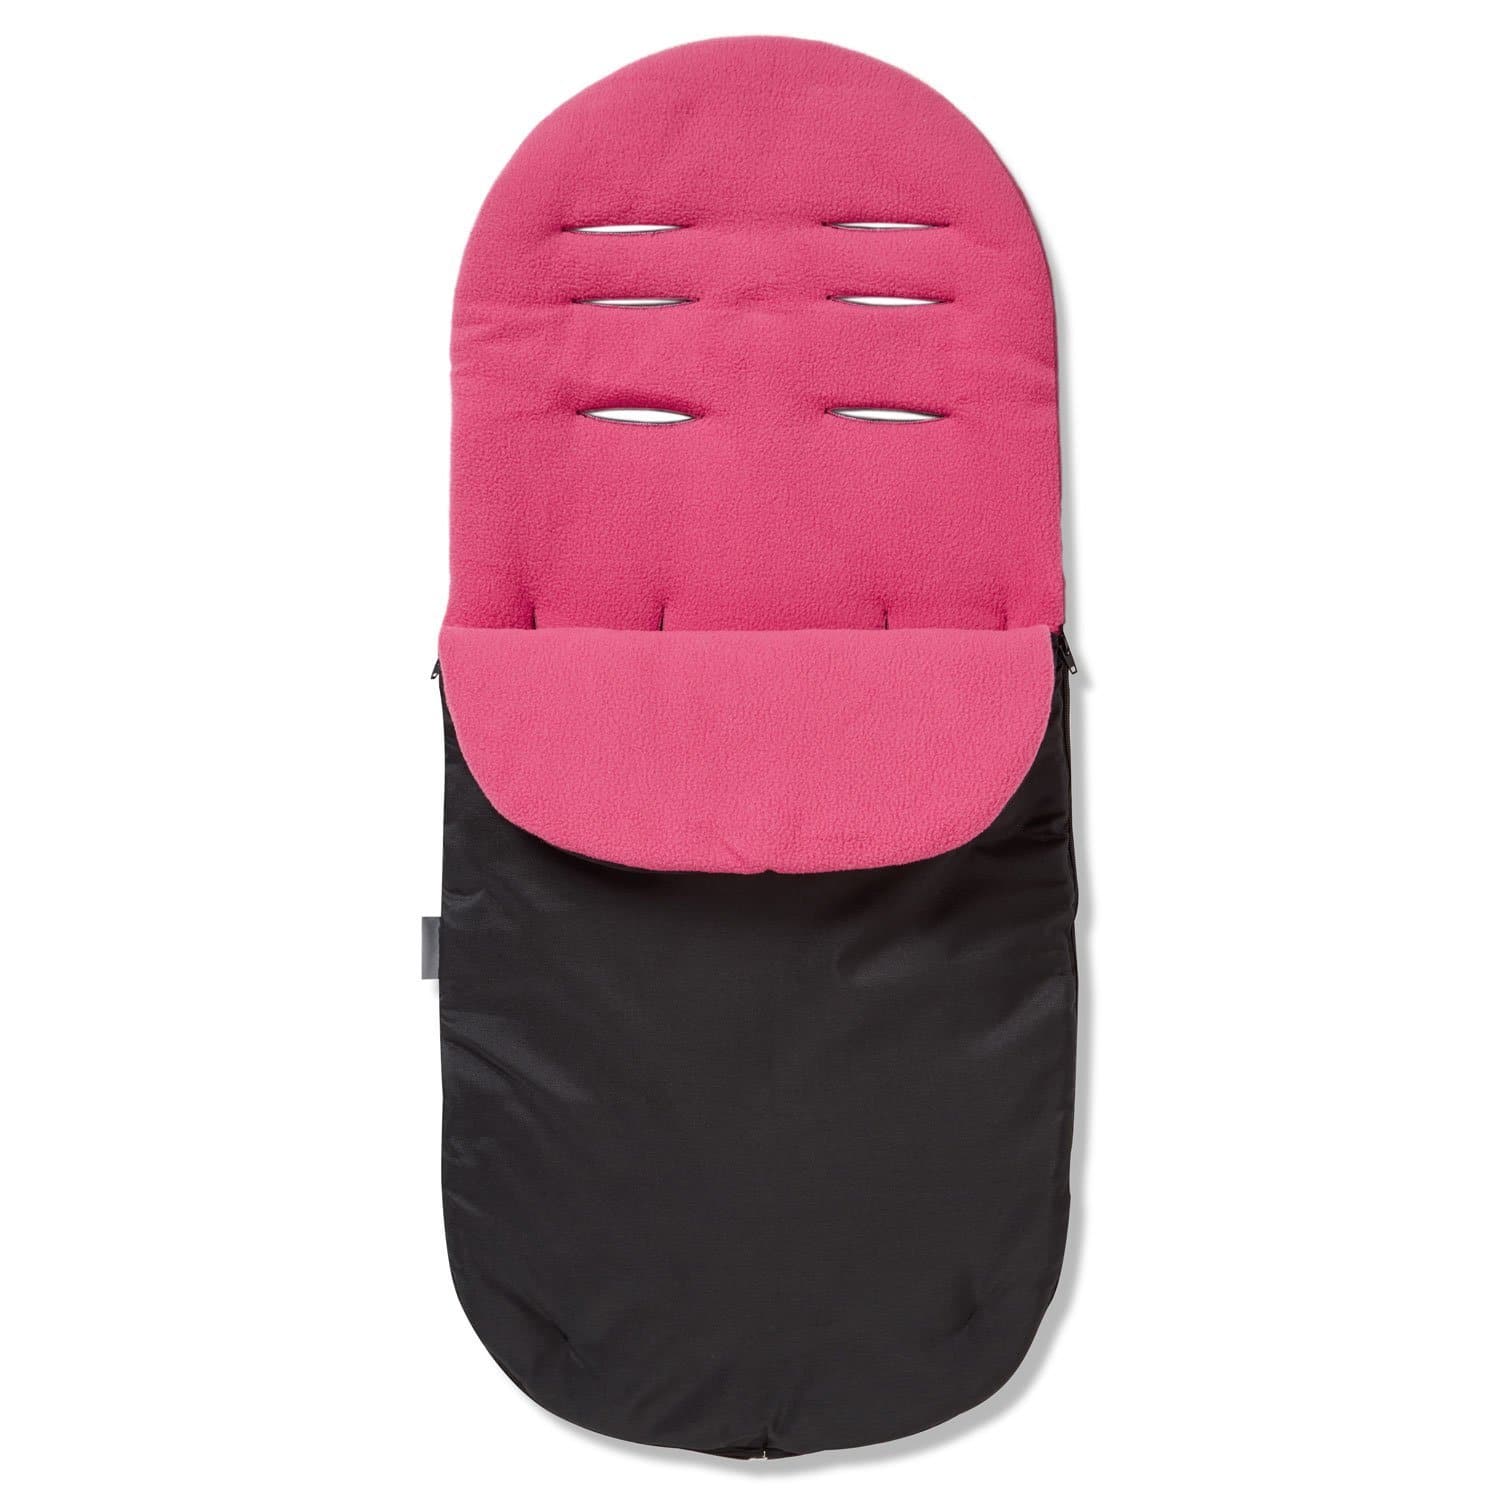 Footmuff / Cosy Toes Compatible with Kinderkraft - Dark Pink / Fits All Models | For Your Little One